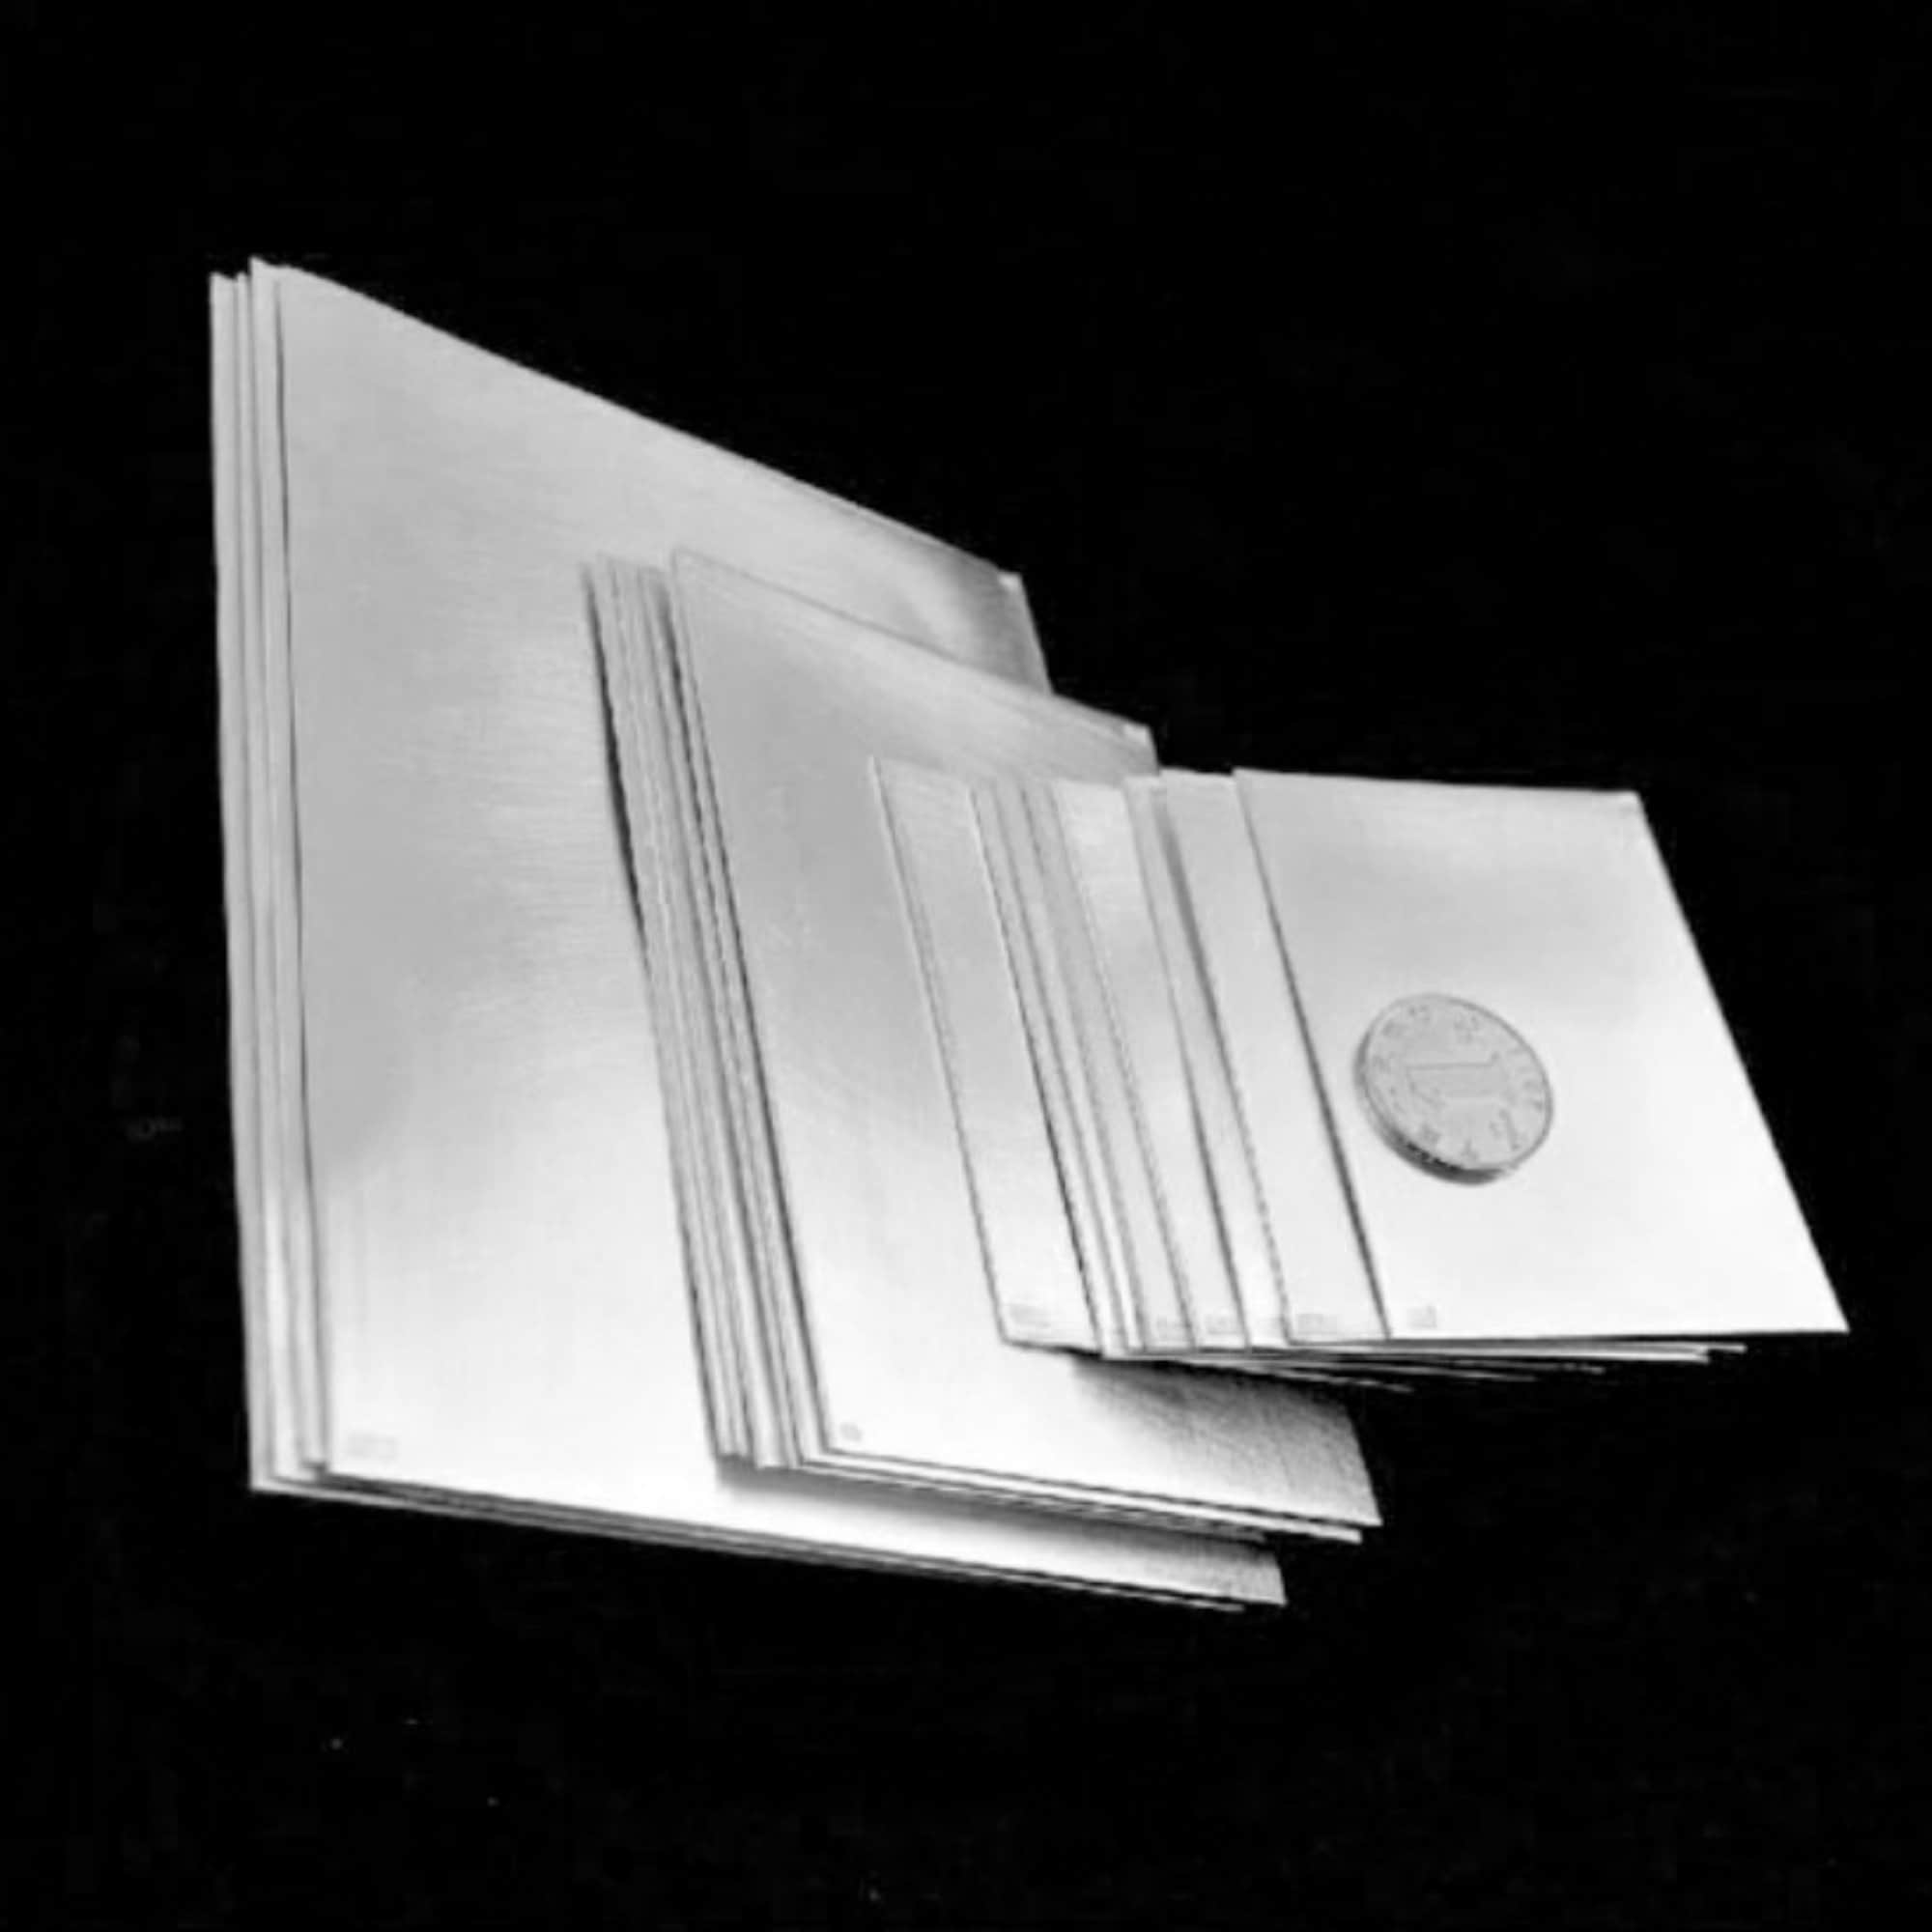 Bedrock Jewelry 6x2 Solid Pure.999 Silver Sheet, Dead Soft, Made in The USA (26 Gauge)